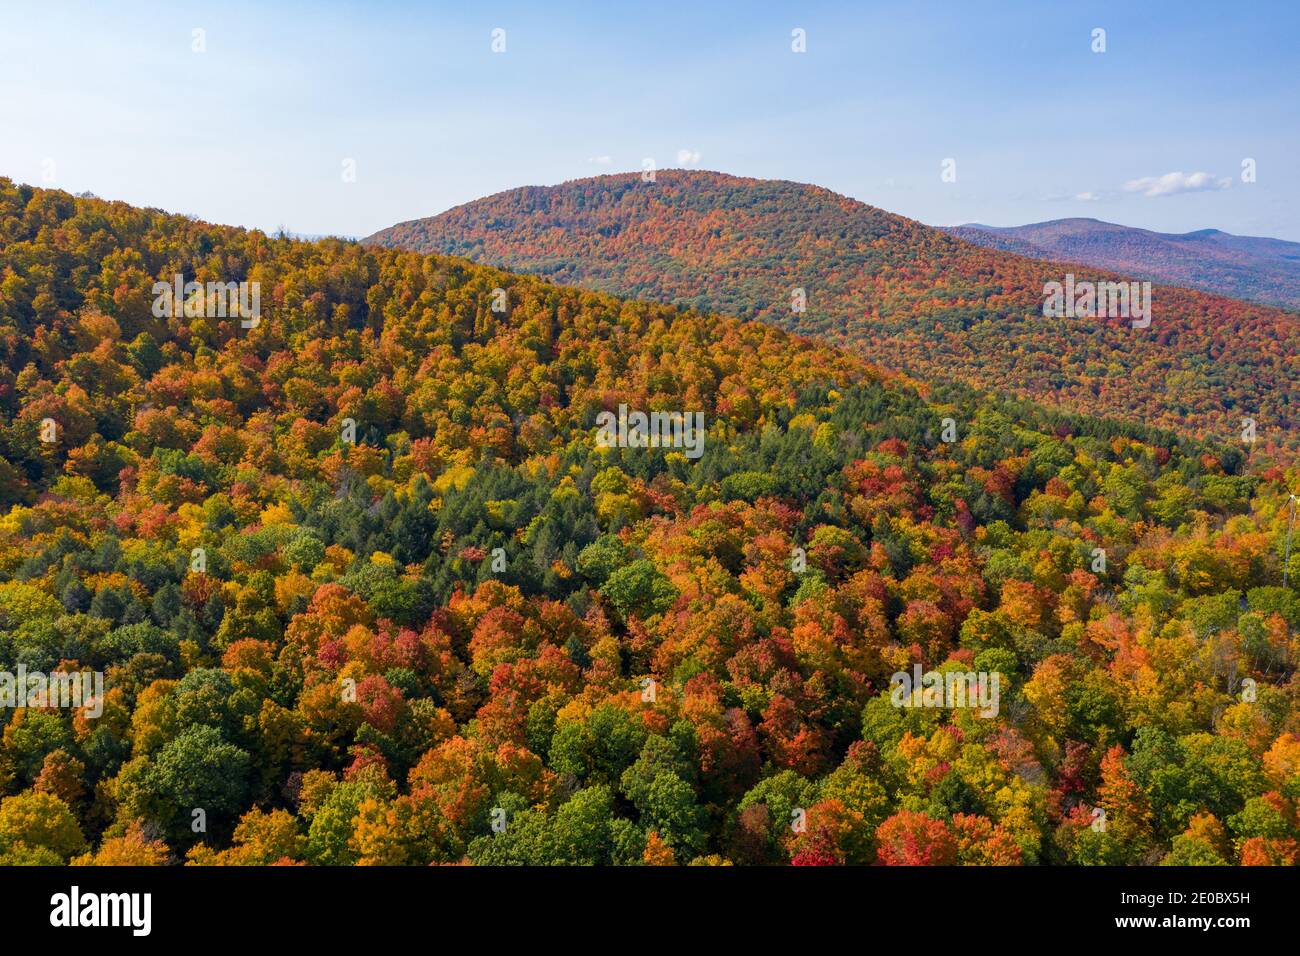 Aerial view of fall foliage along the Catskill Mountains in upstate New